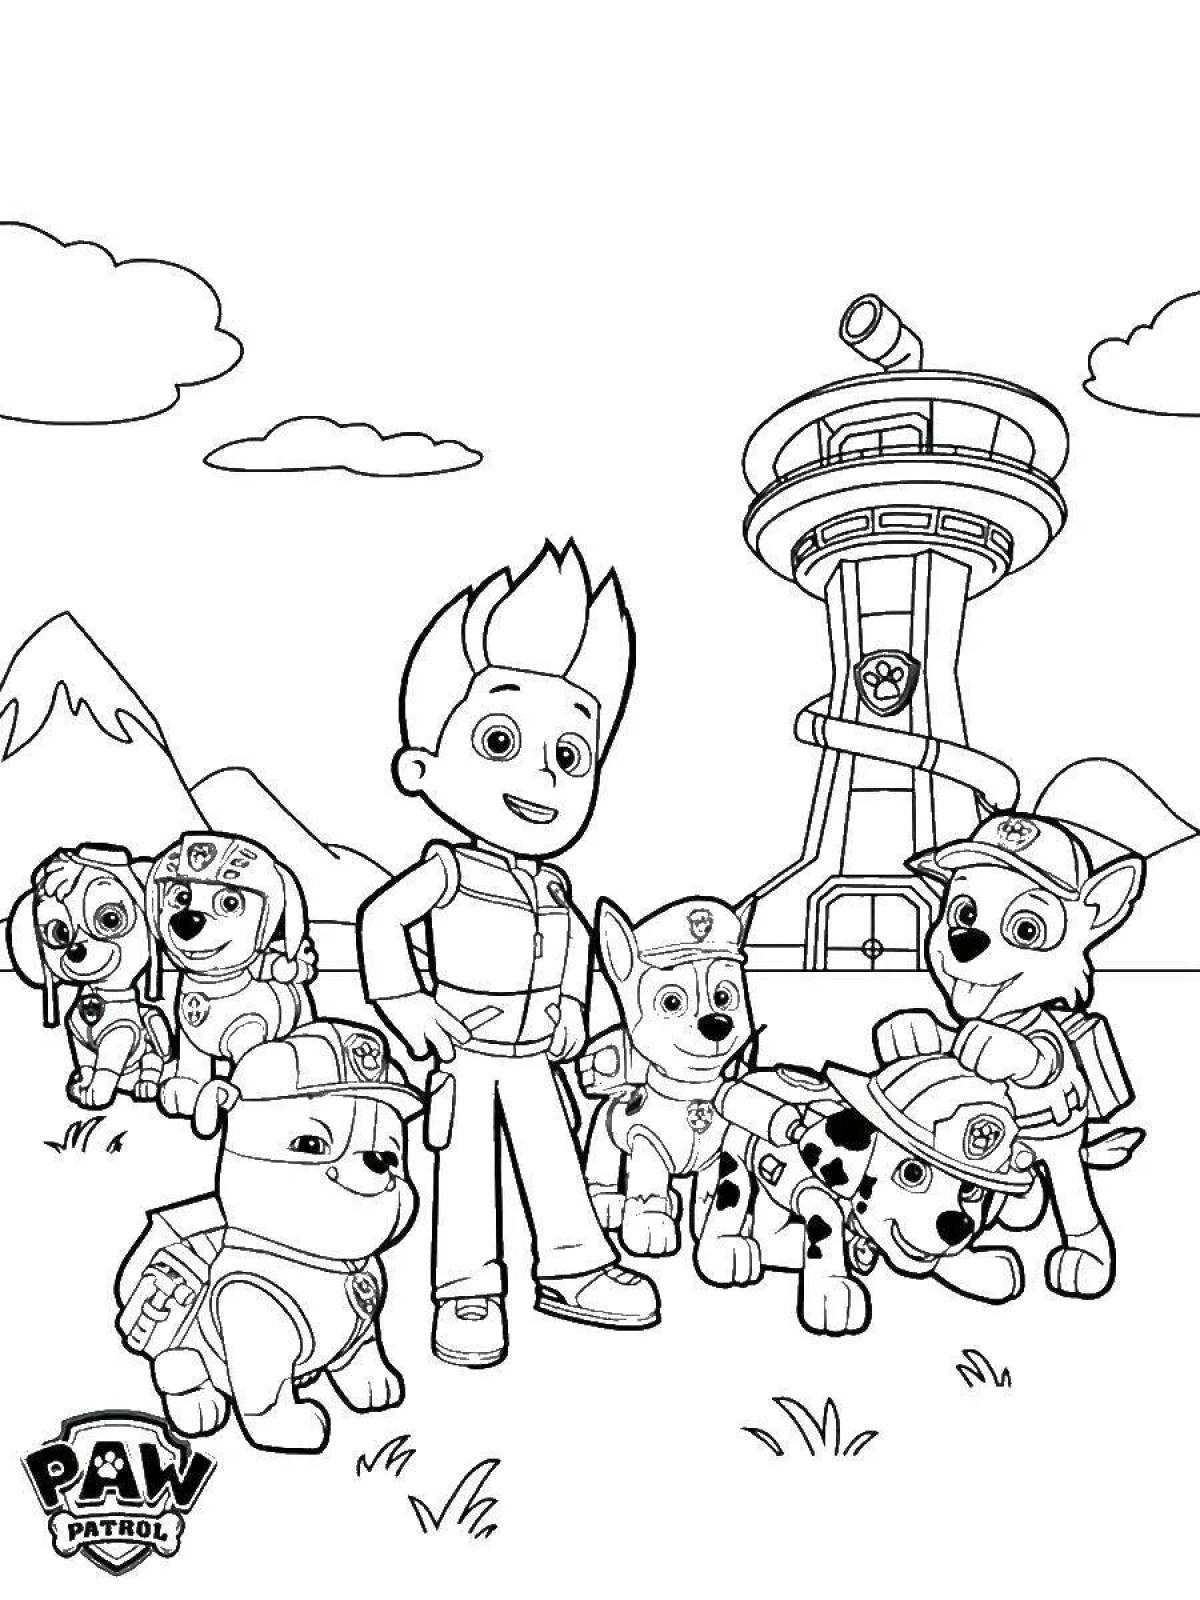 Paw Patrol tower coloring page